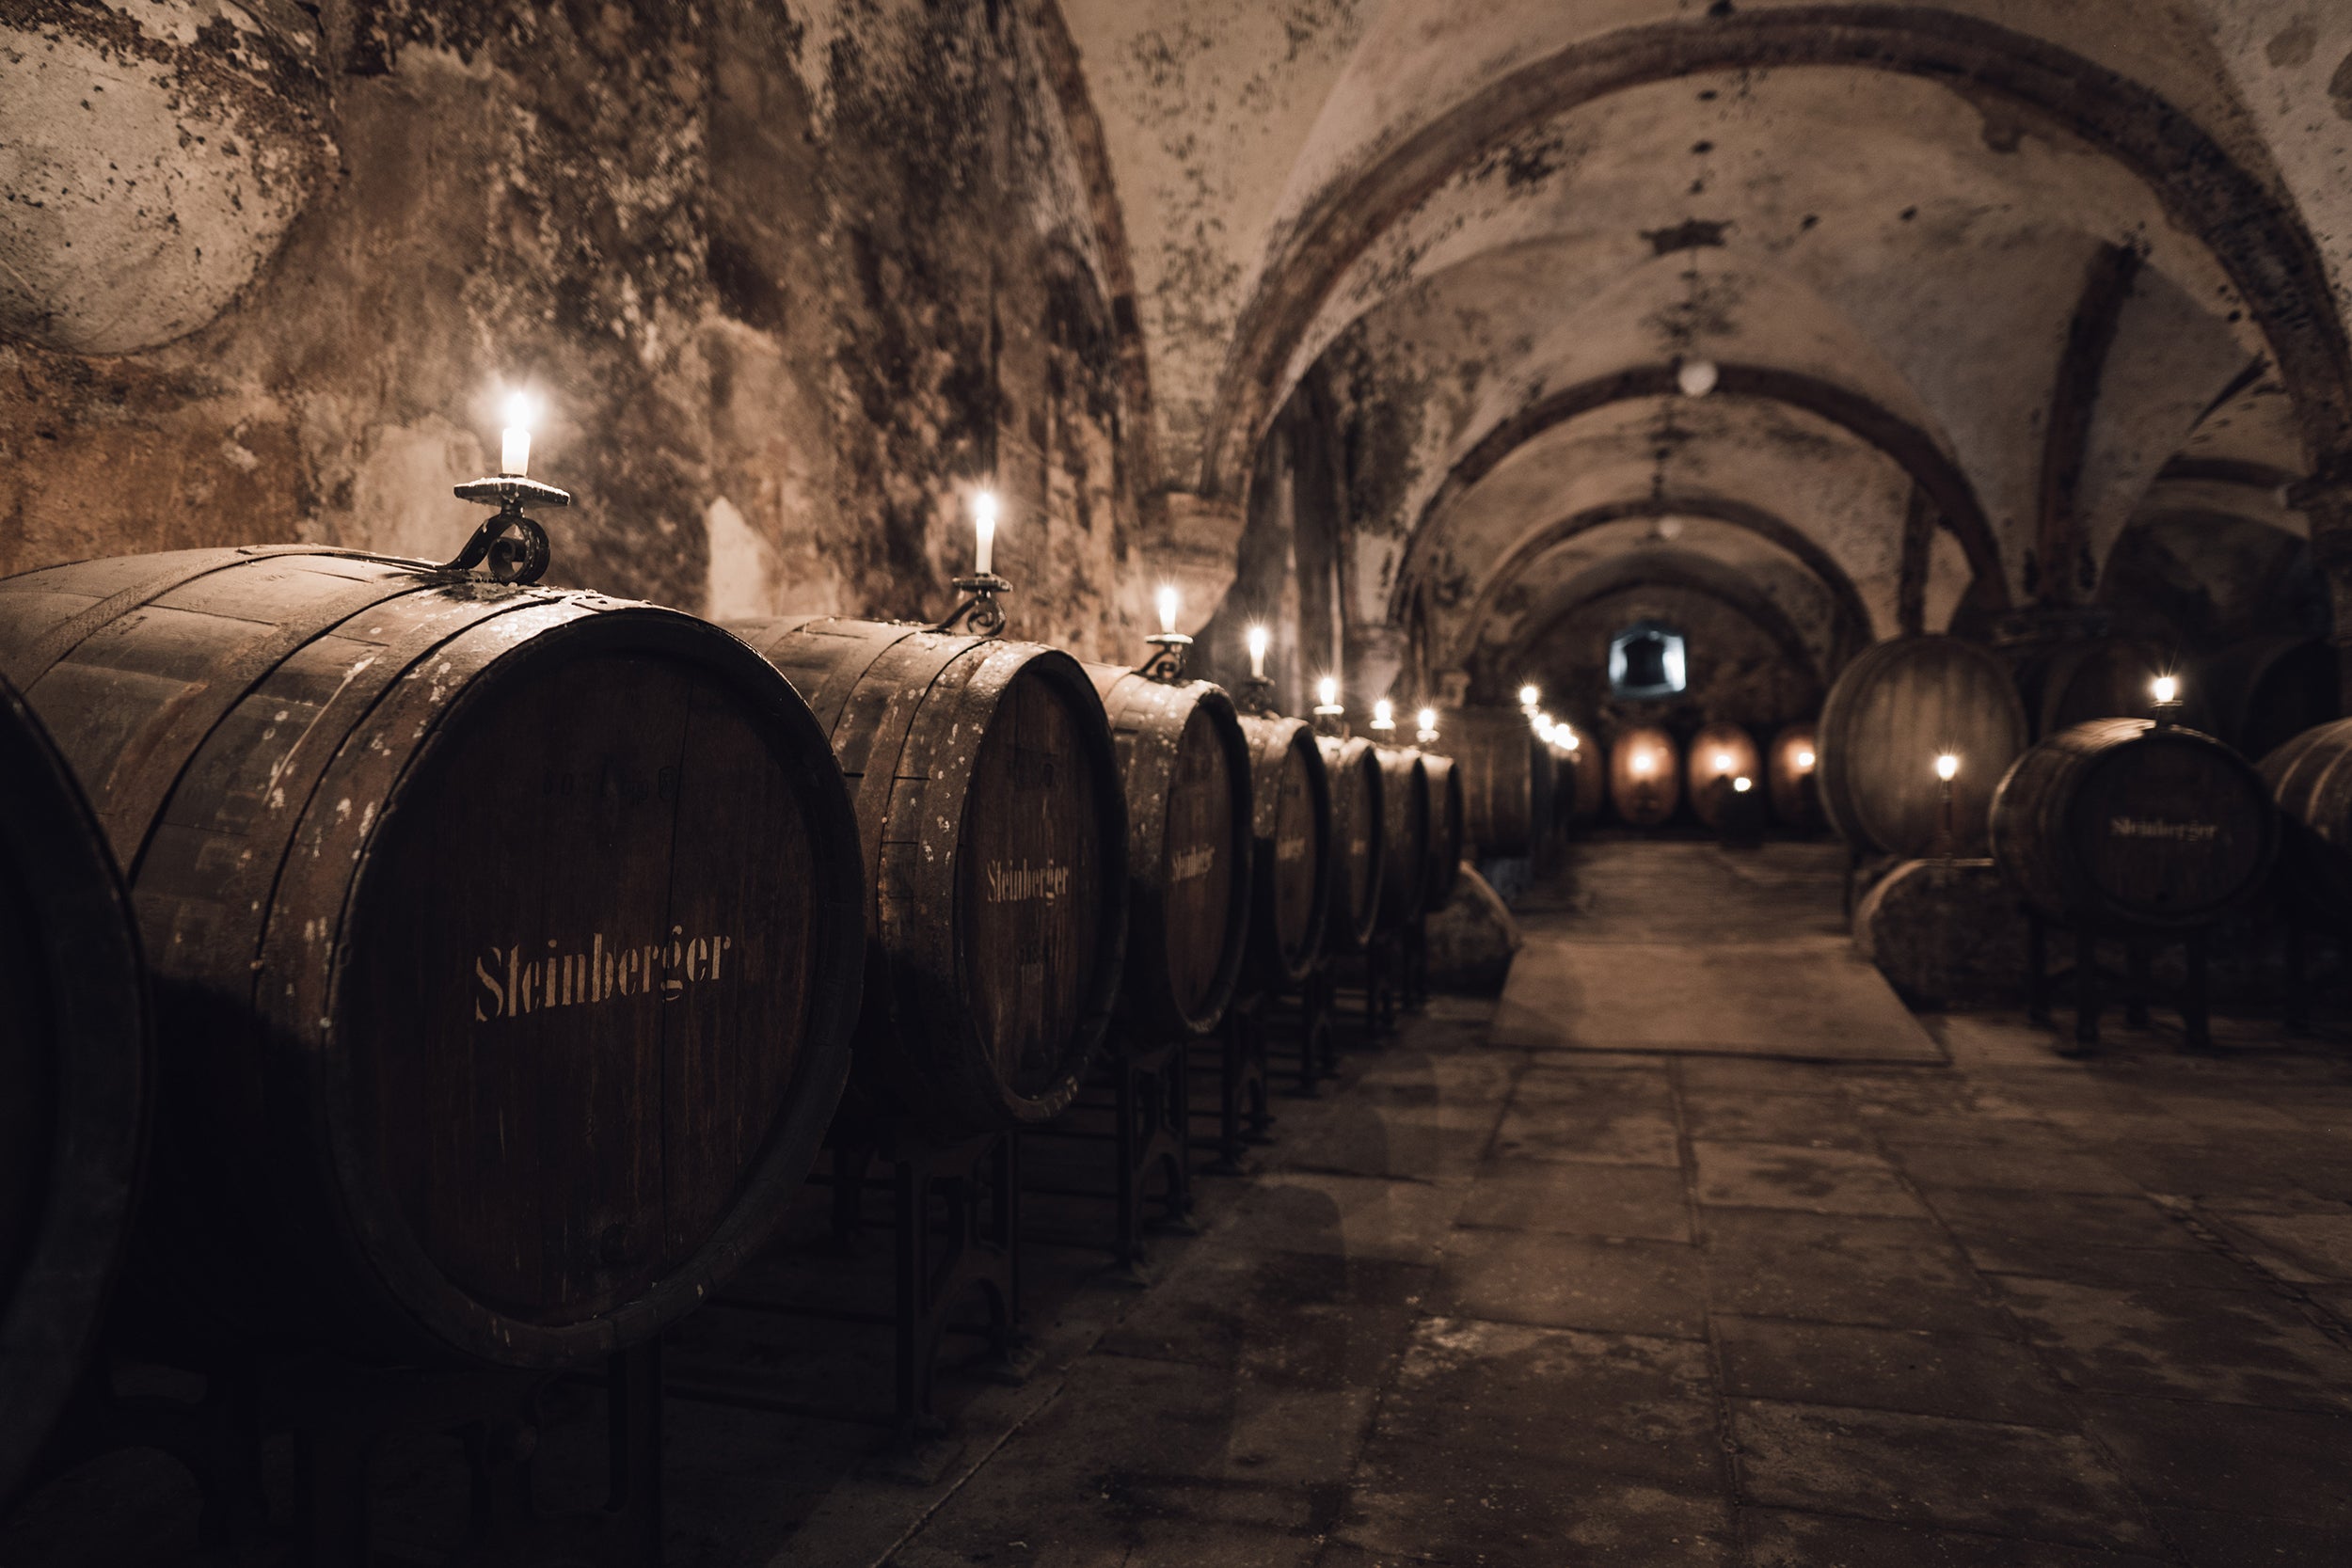 The atmospheric centuries old cellars of Kloster Eberbach